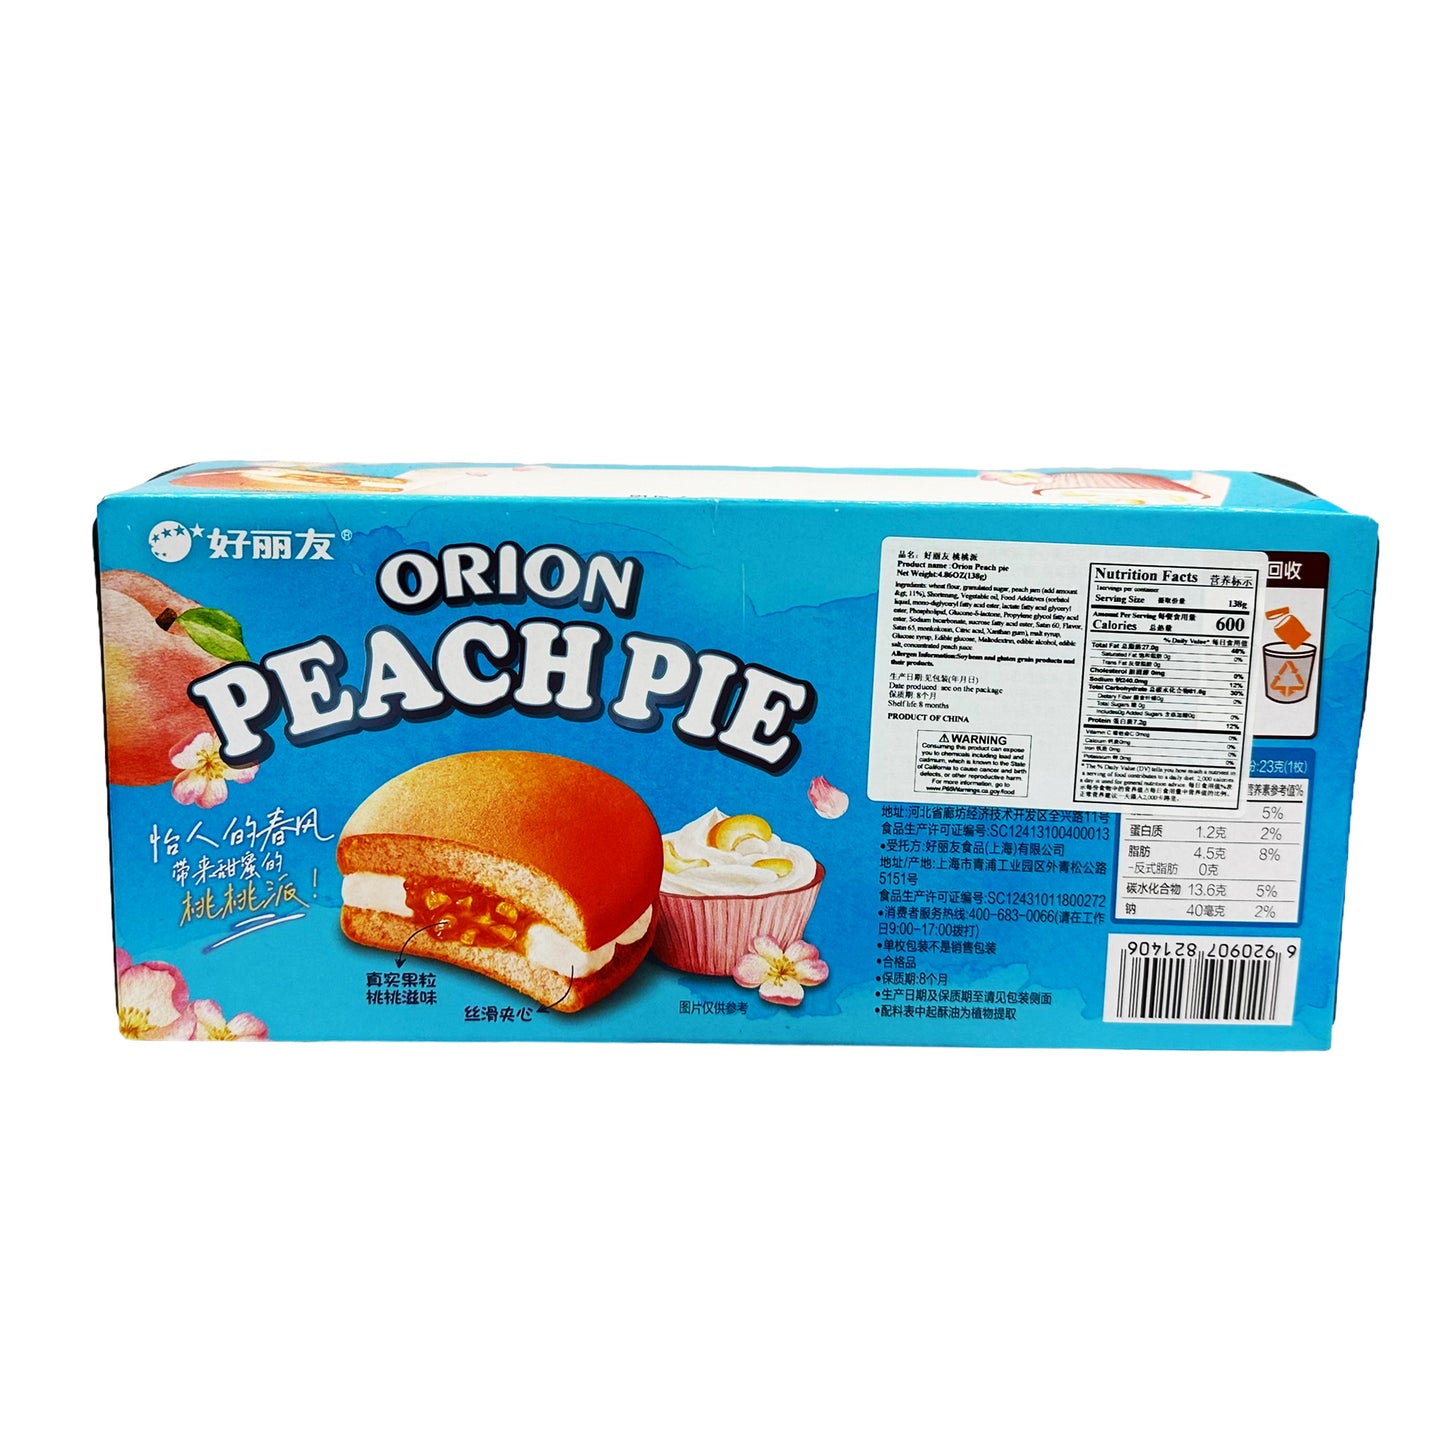 Back graphic image of Orion Peach Pie 4.86oz (138g)